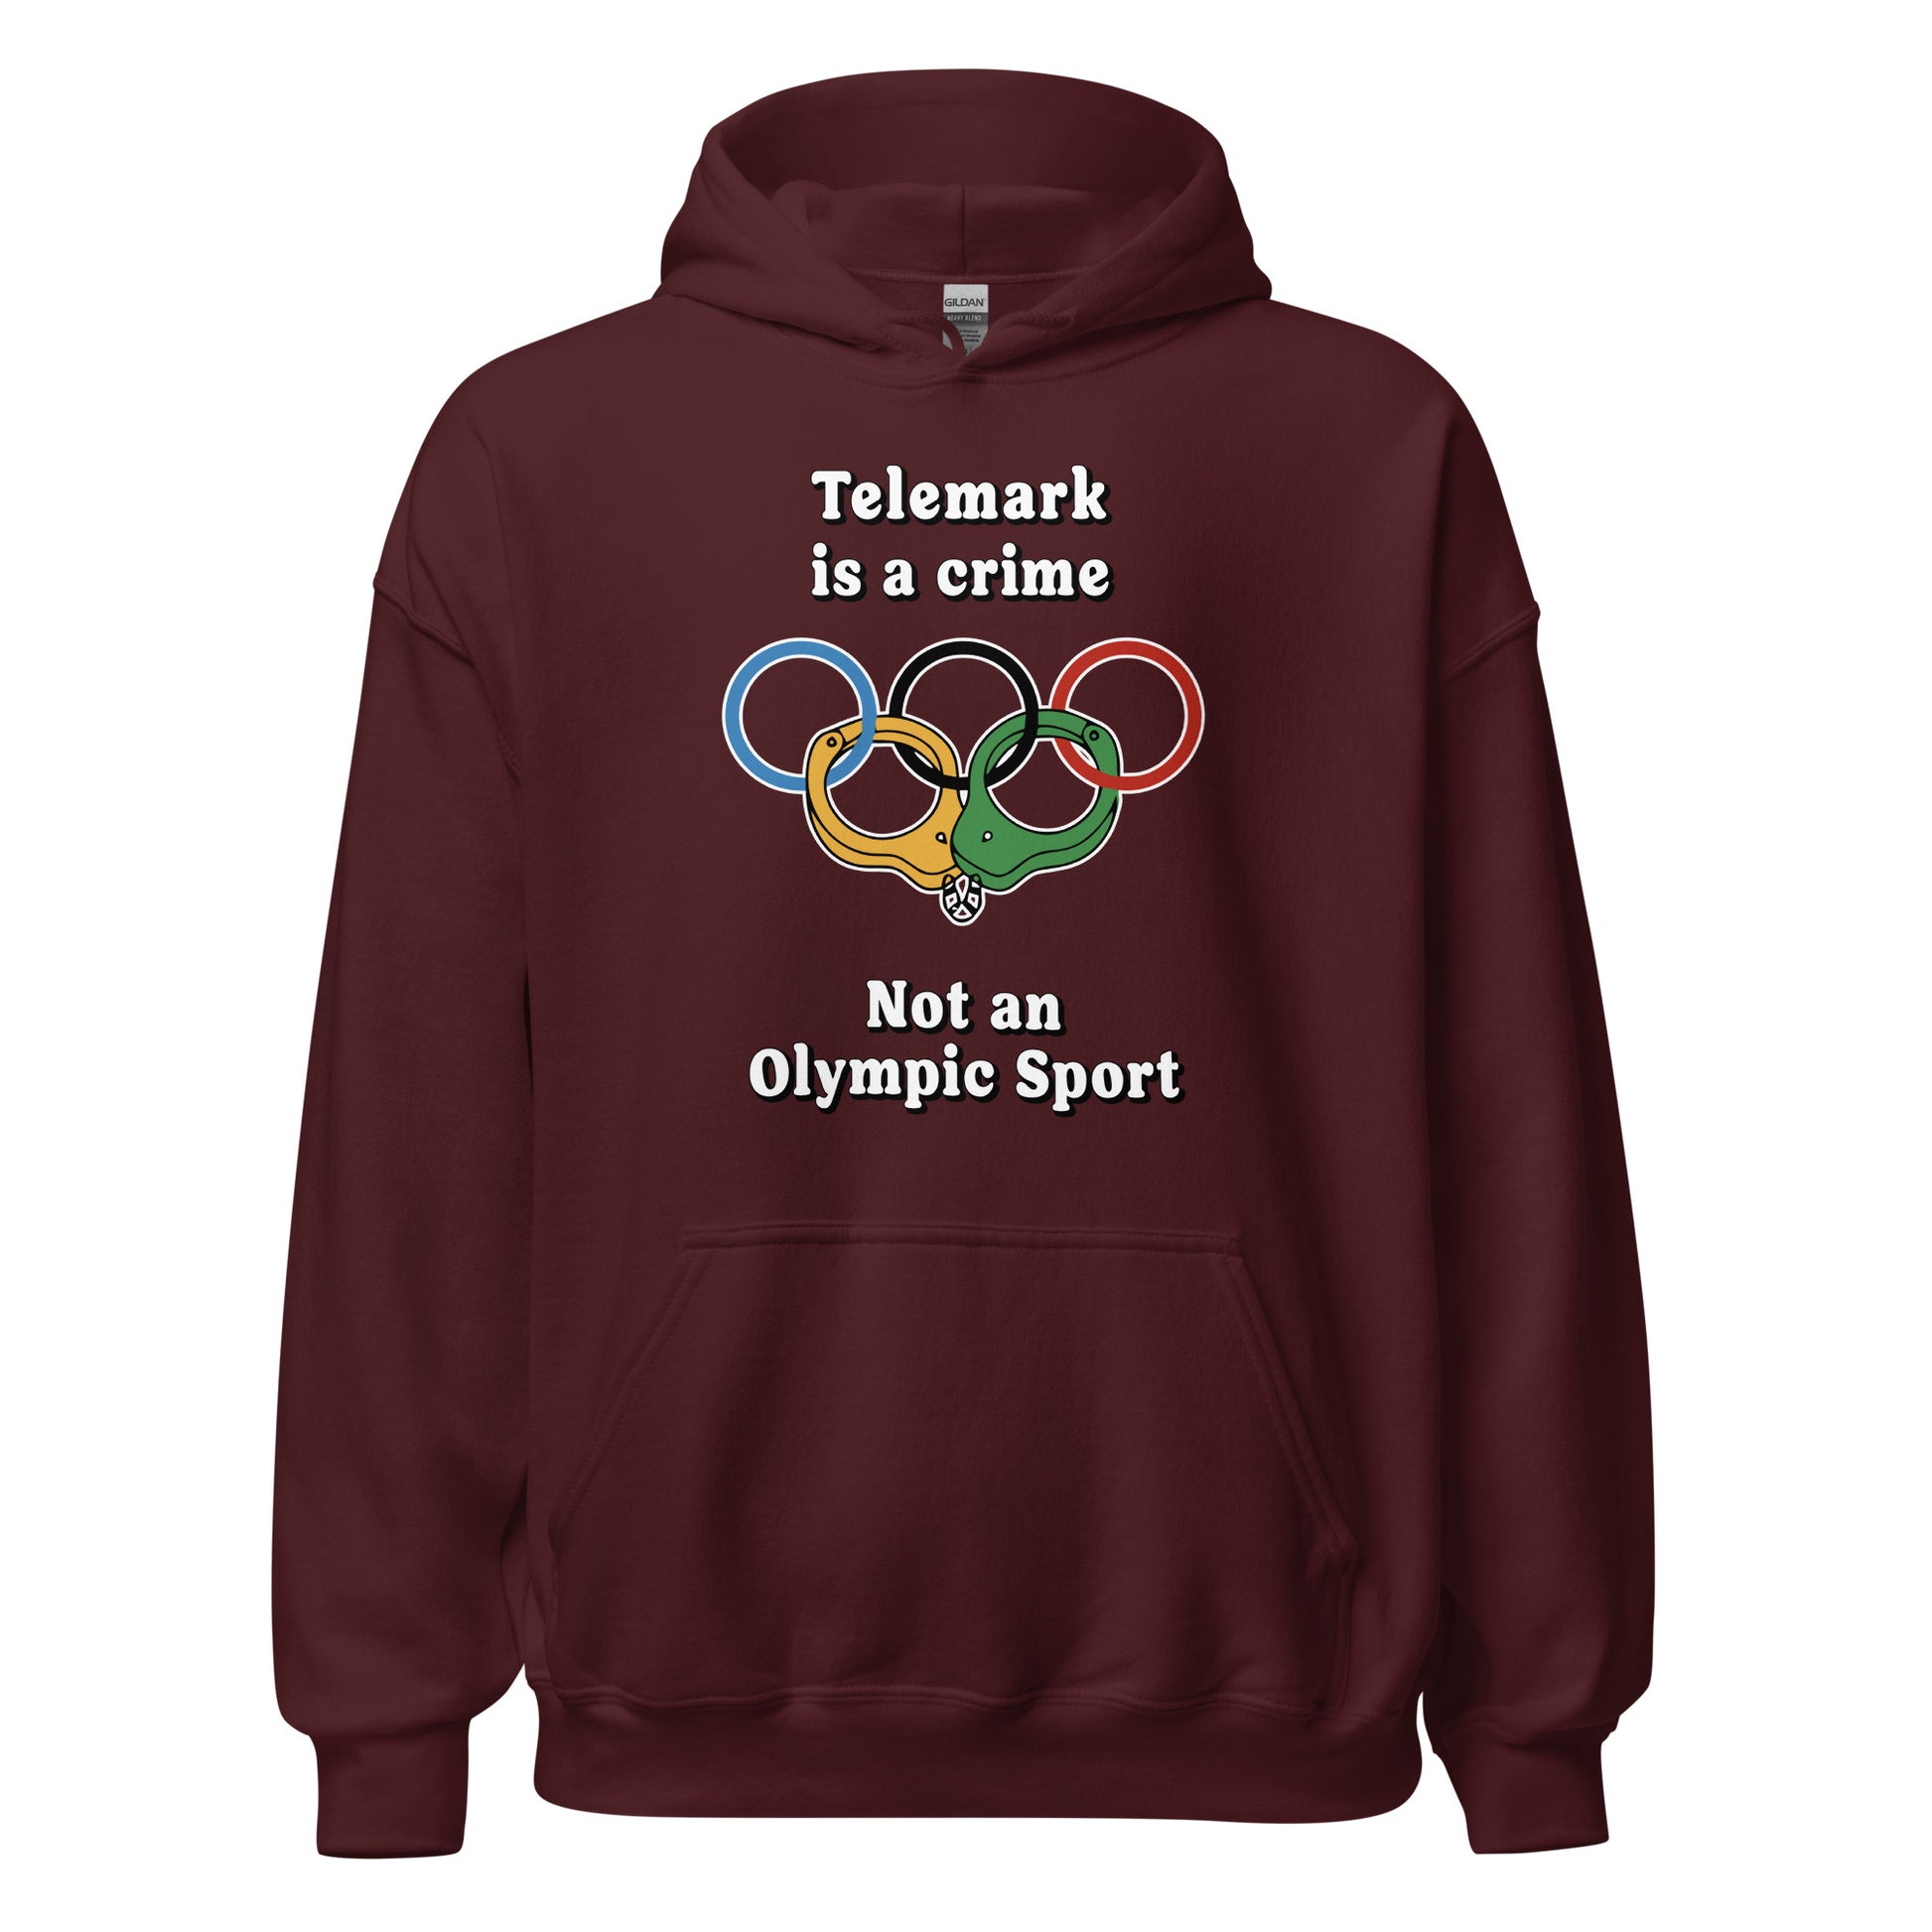 Telemark is a crime not an olympic sport design printed by Whistler Shirts